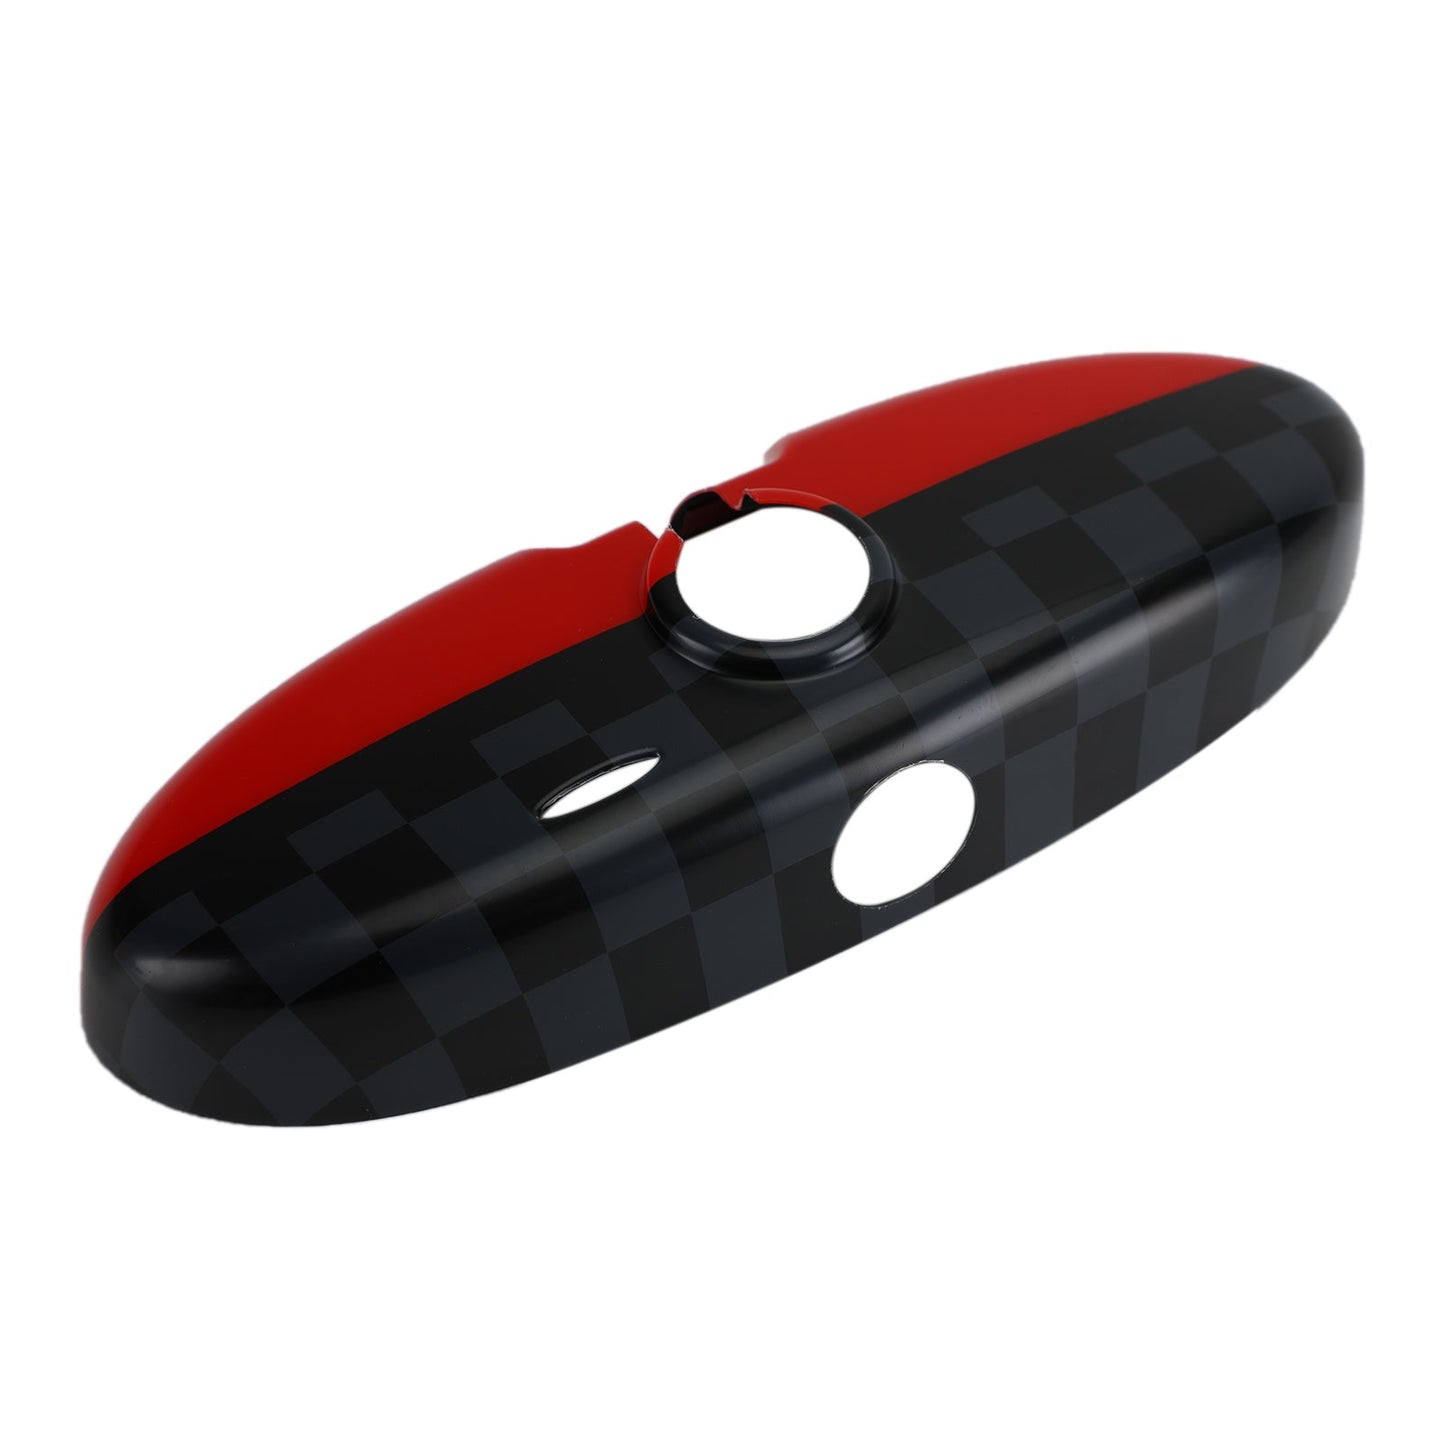 Black/Grey Checkered Red Rear View Mirror Cover For BMW MINI Cooper R55 R56 R57